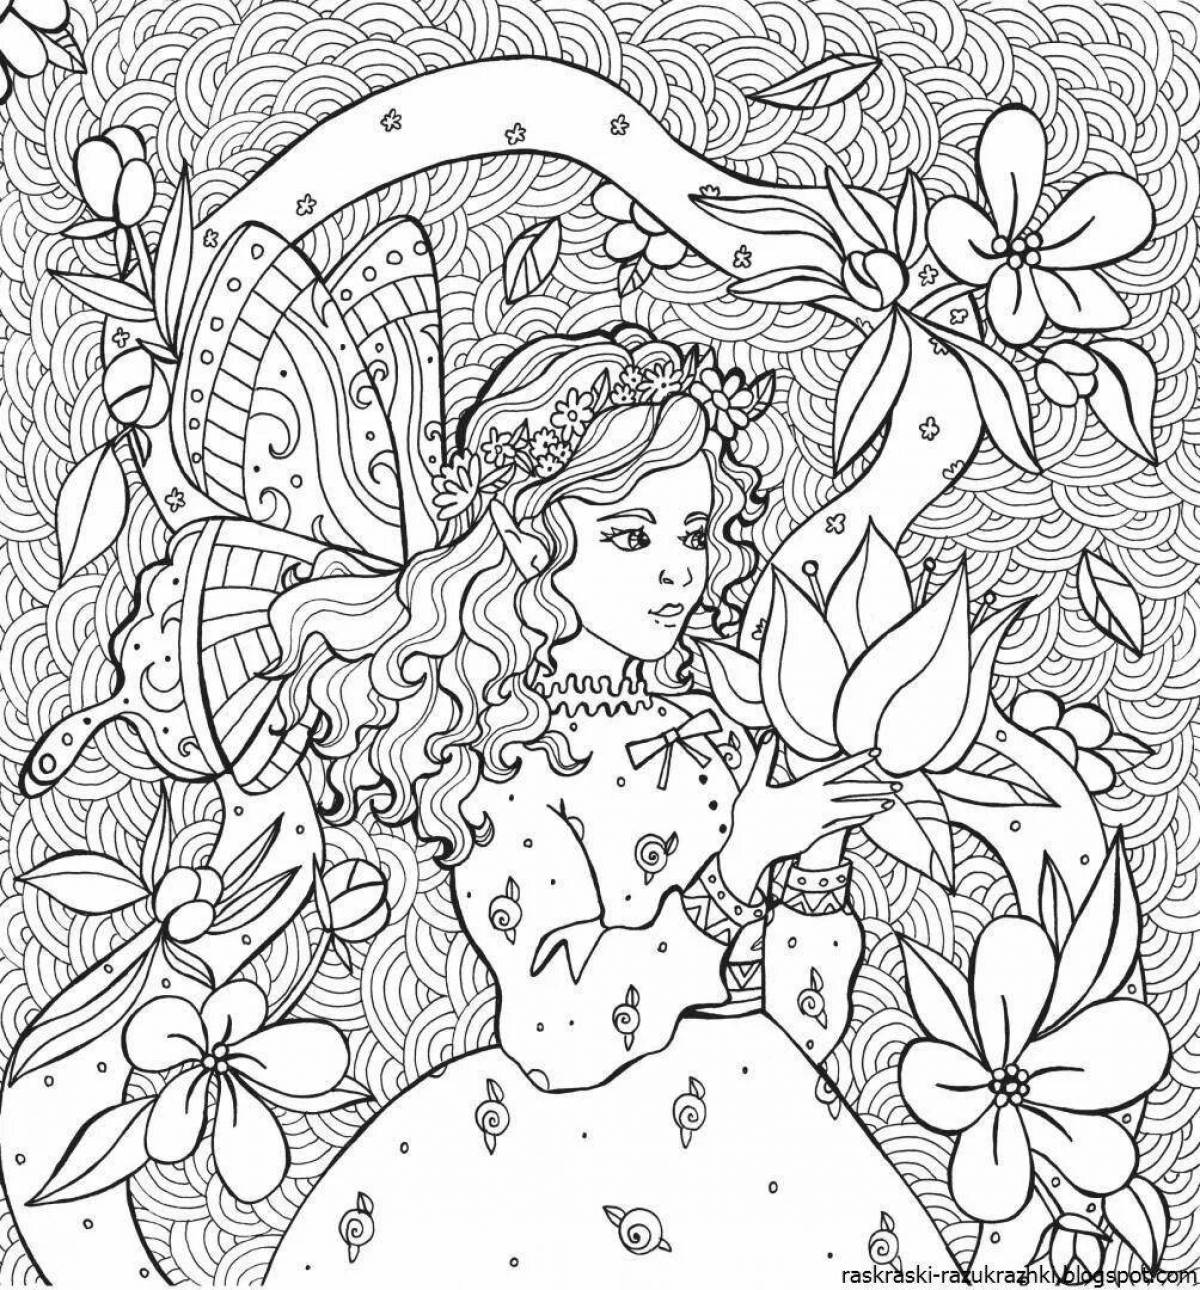 Master coloring page 11 years difficult